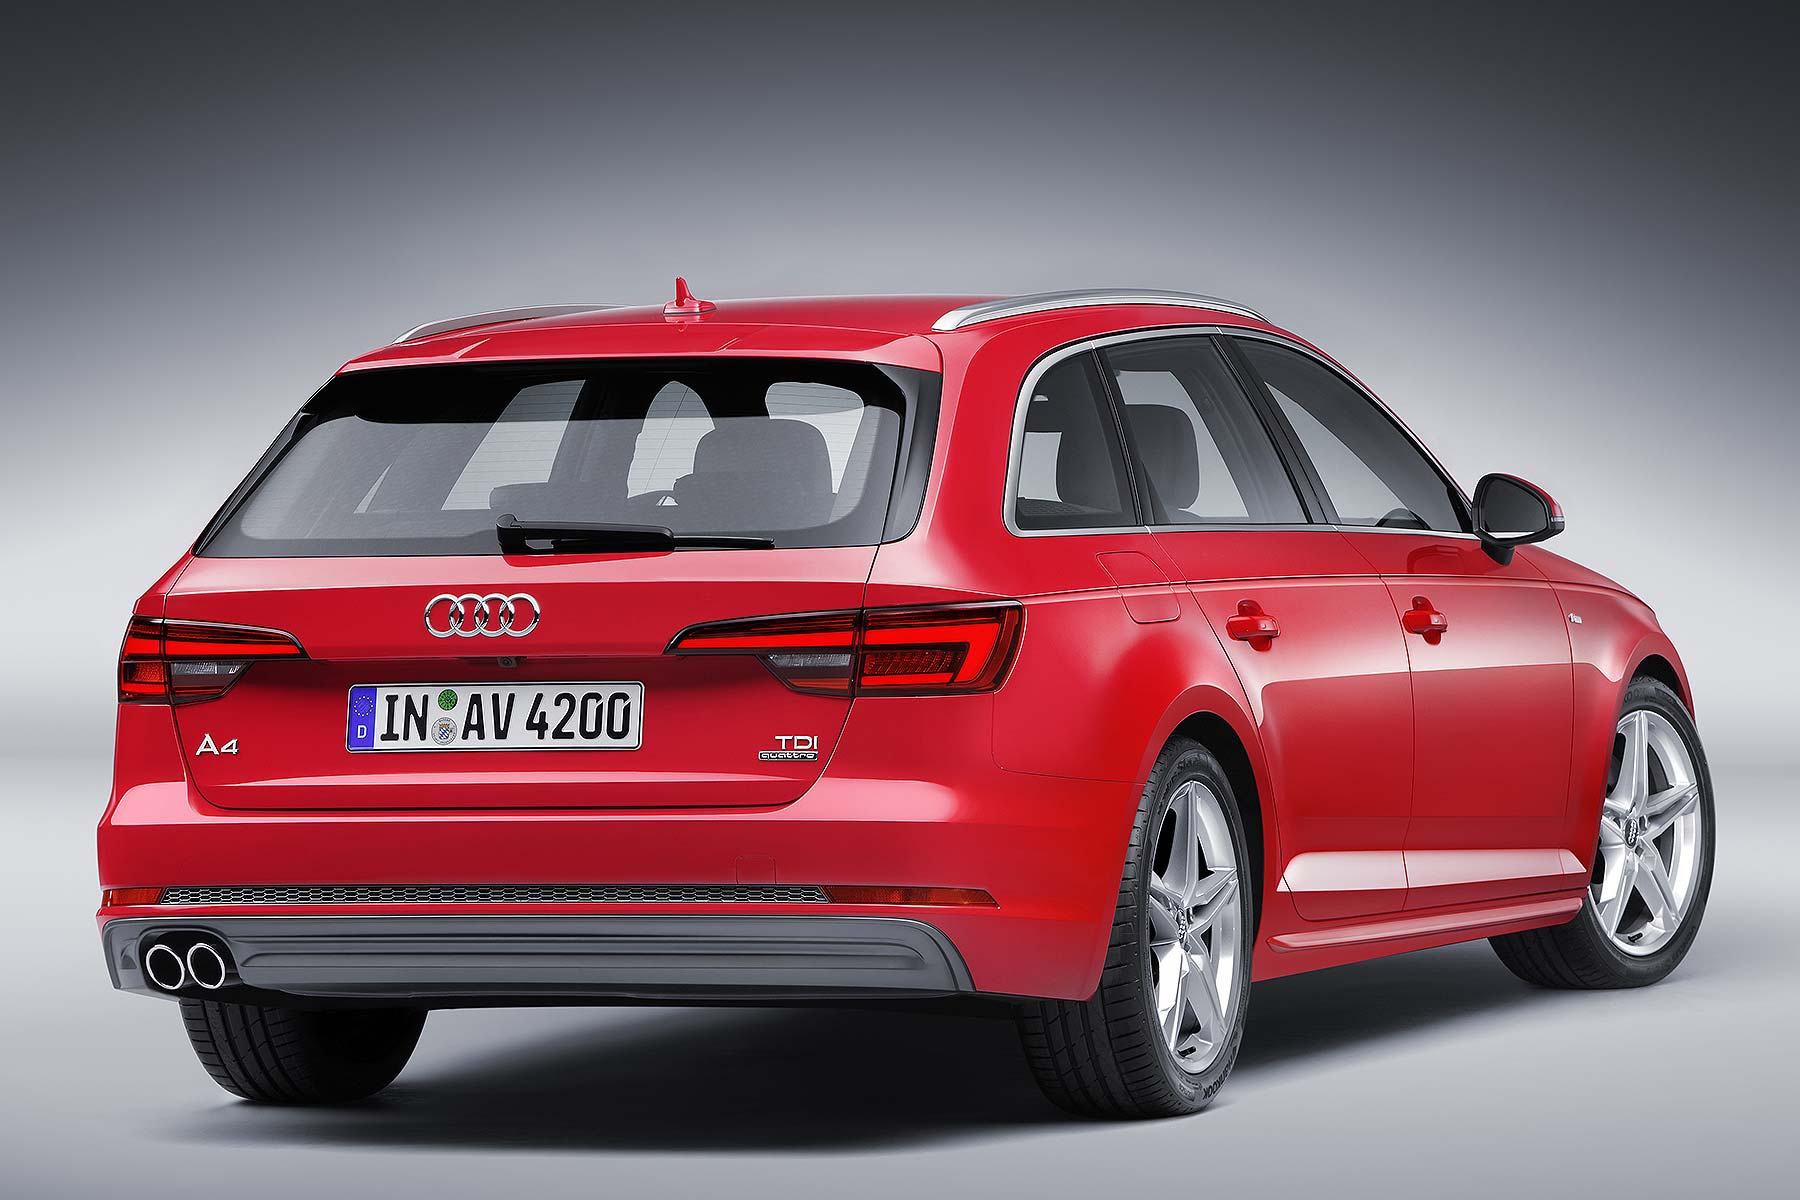 New 2016 Audi A4 Revealed Motoring Research